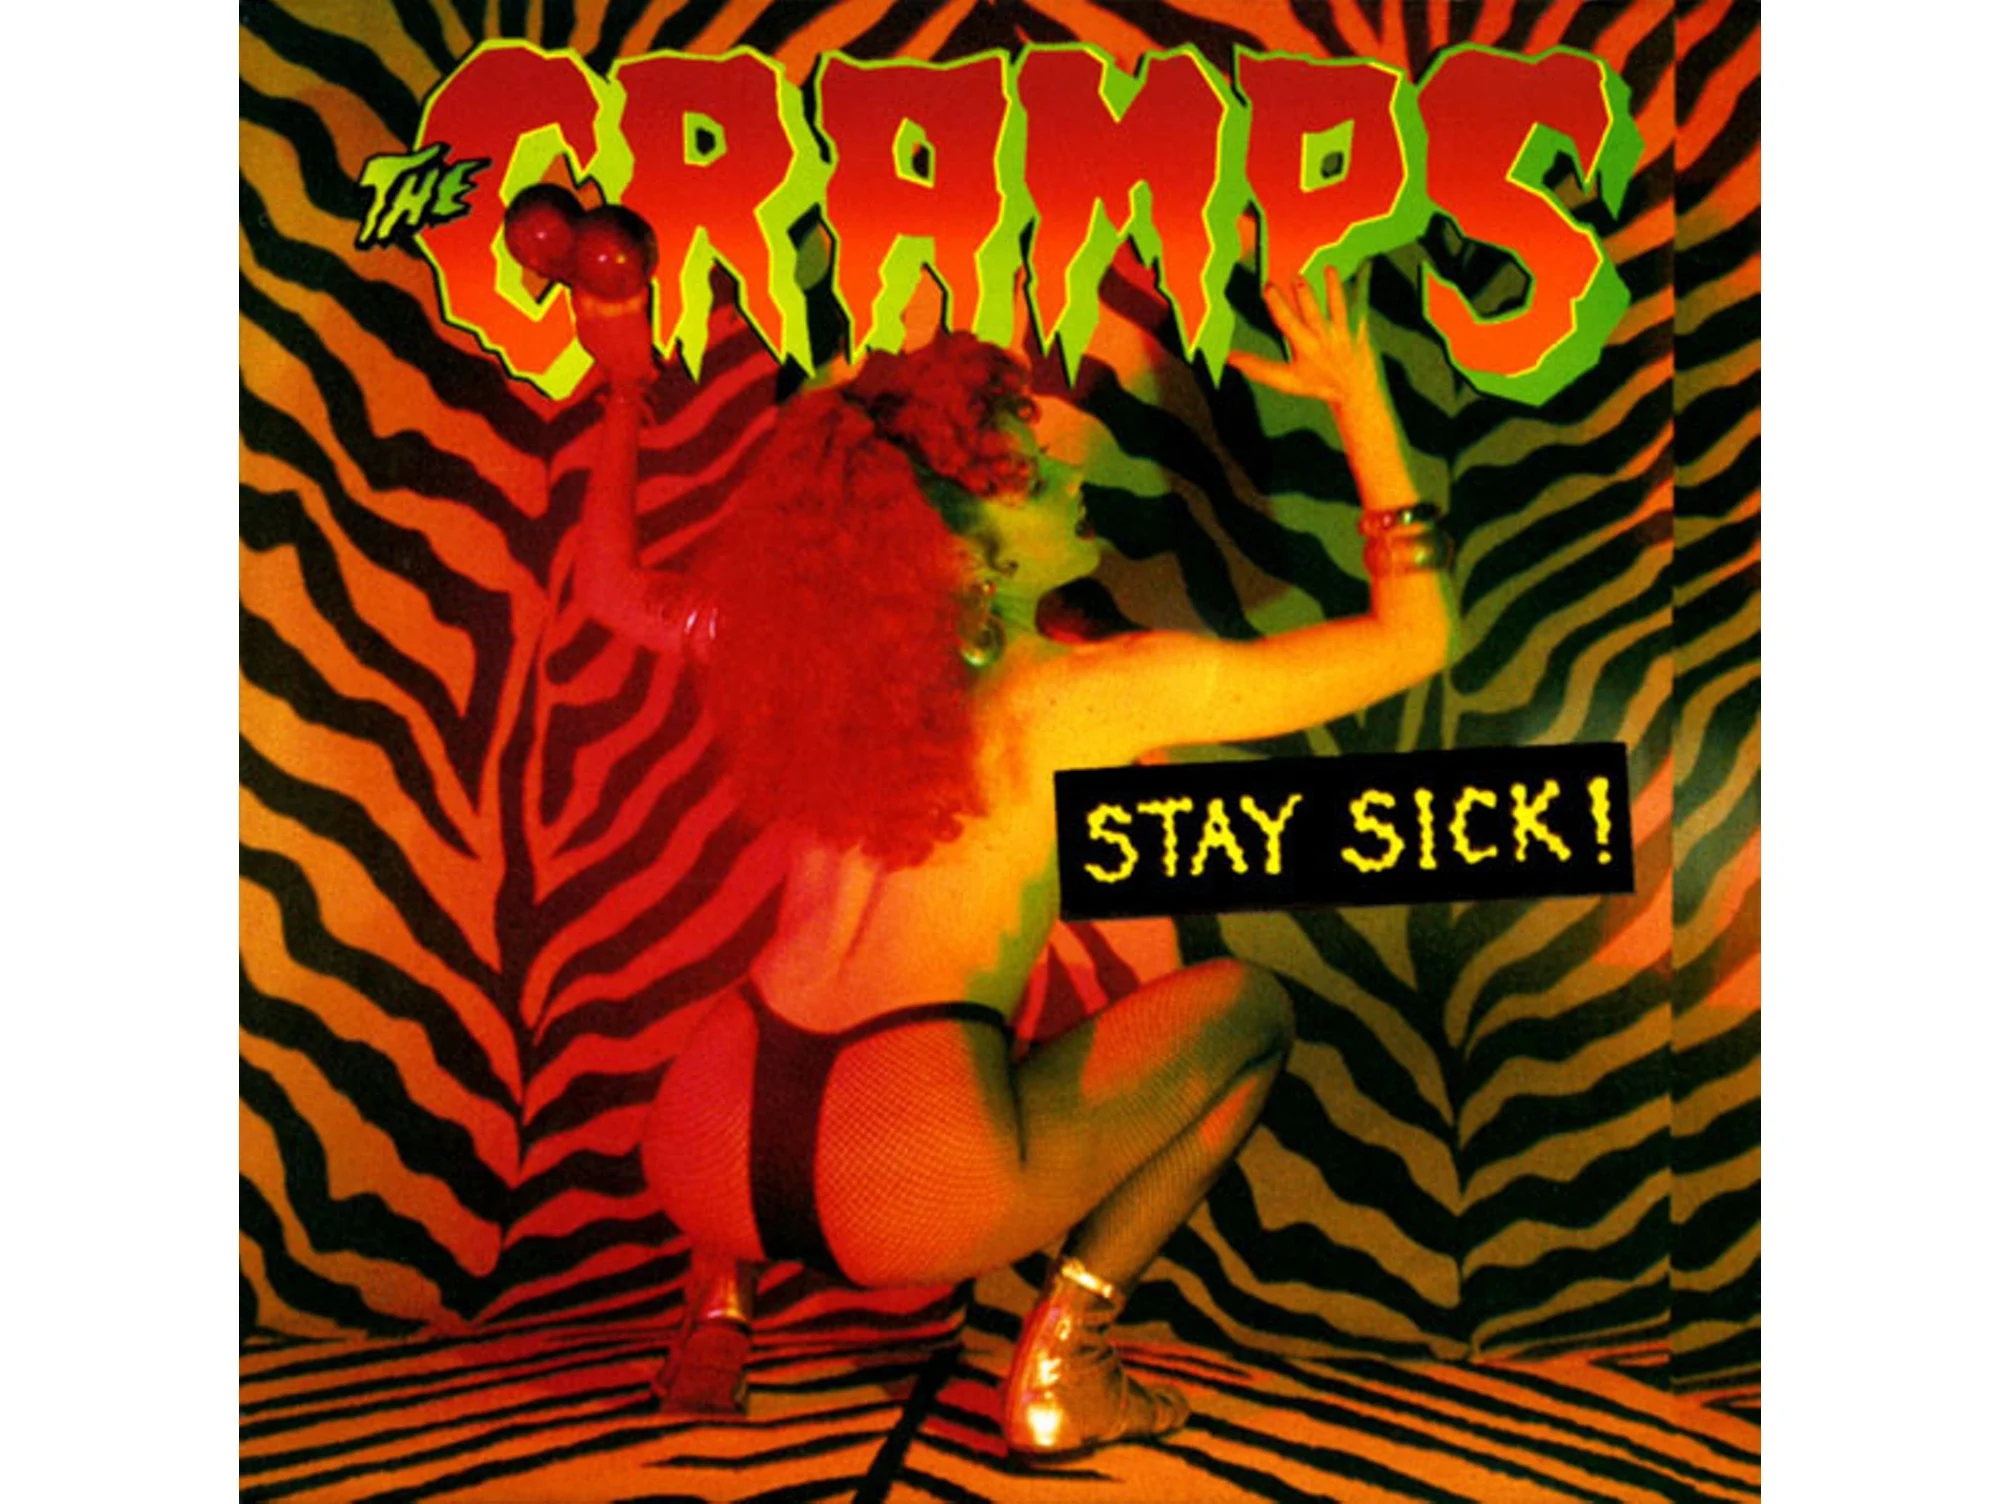 Stay Sick! - The Cramps